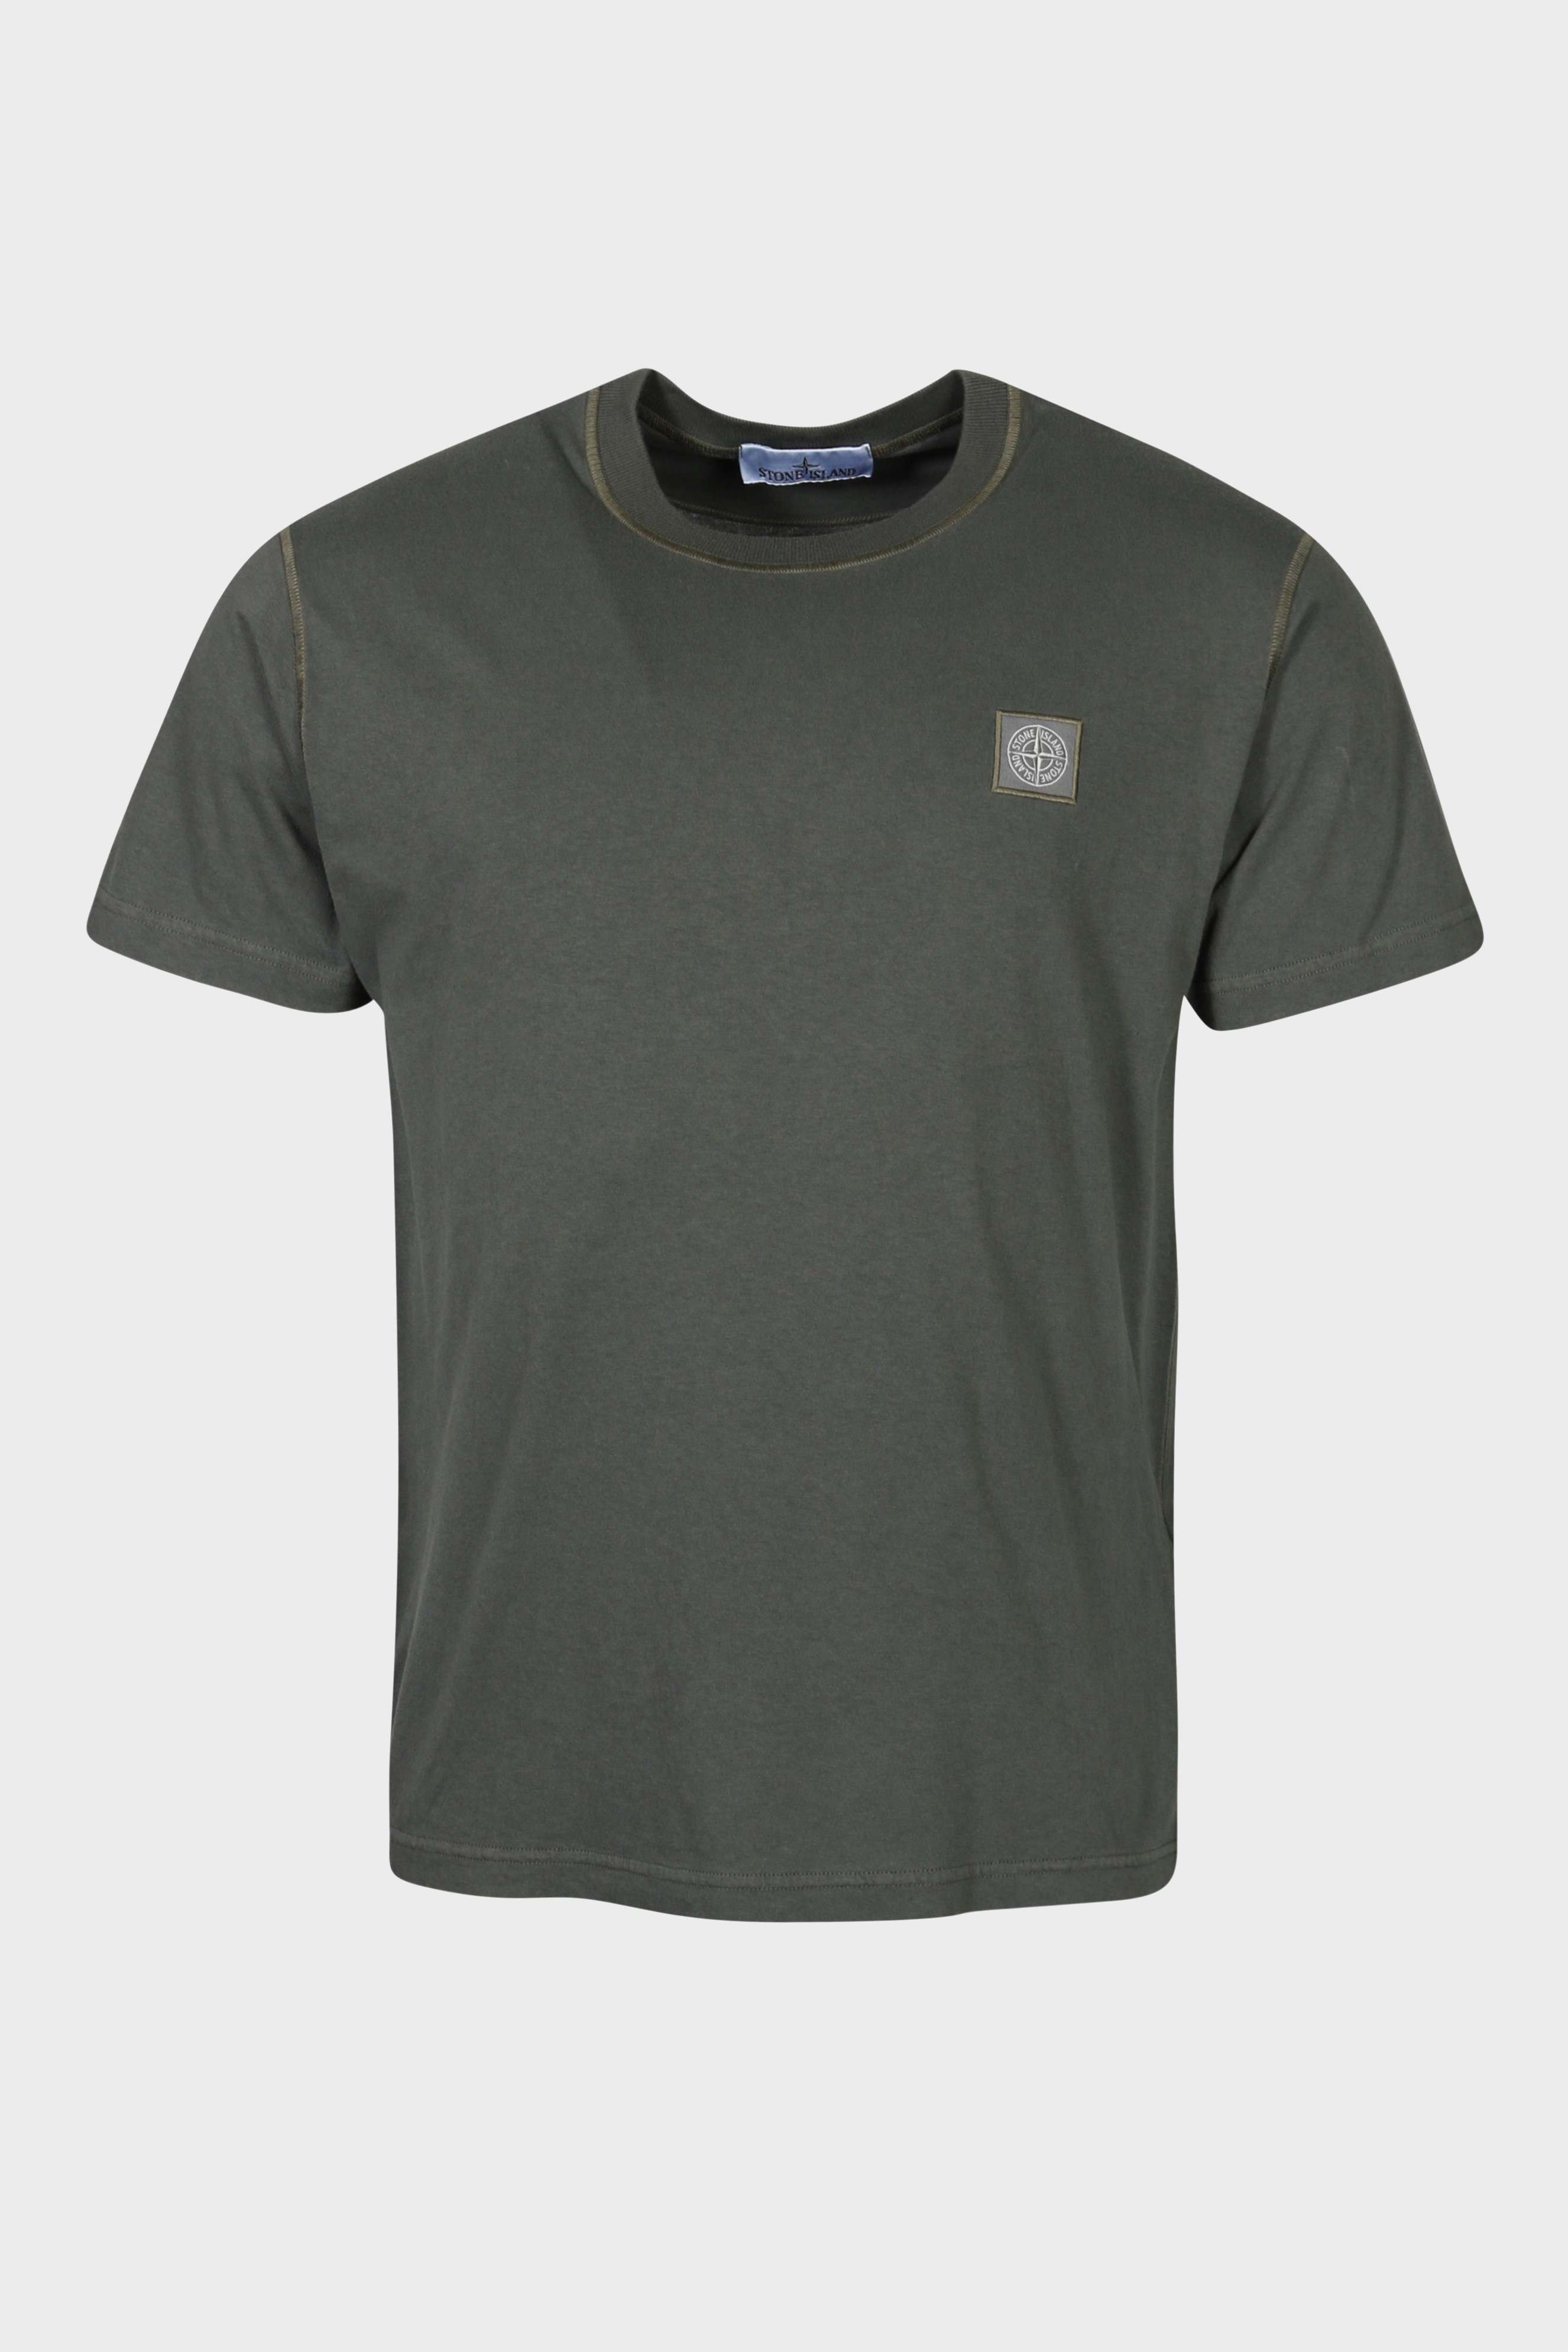 STONE ISLAND T-Shirt in Washed Green